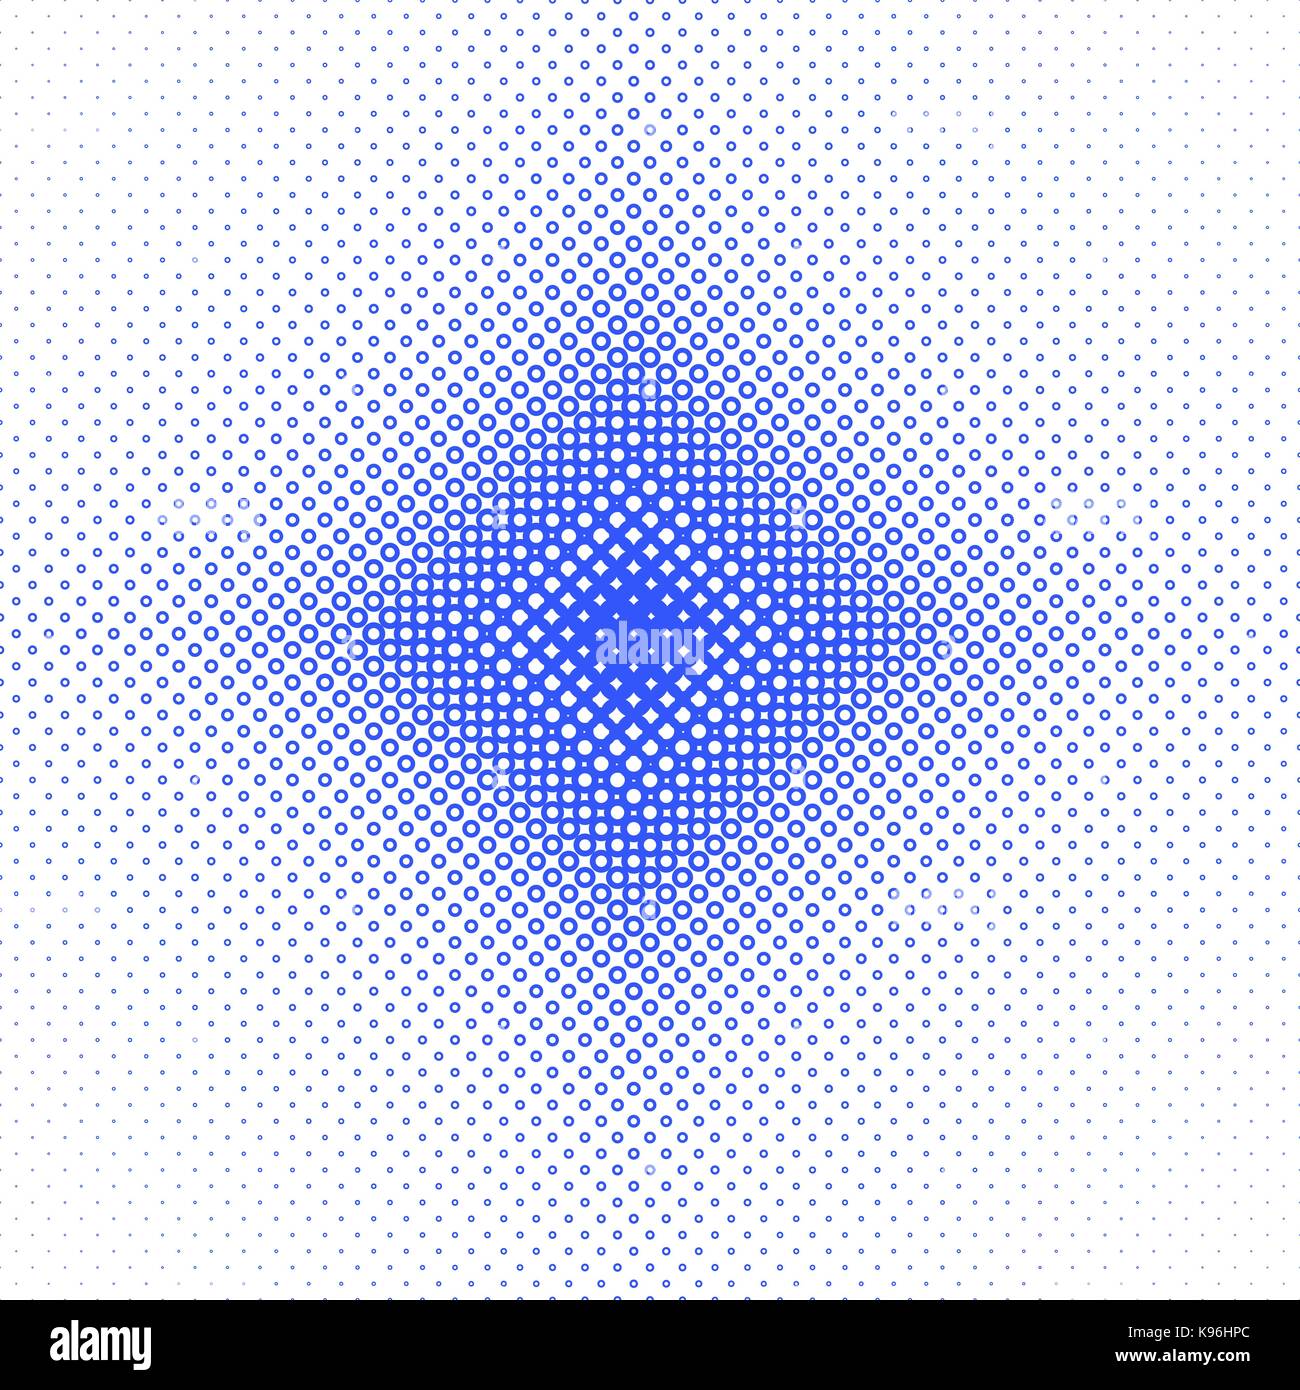 Symmetrical halftone circle pattern background - vector design from circles in varying sizes Stock Vector